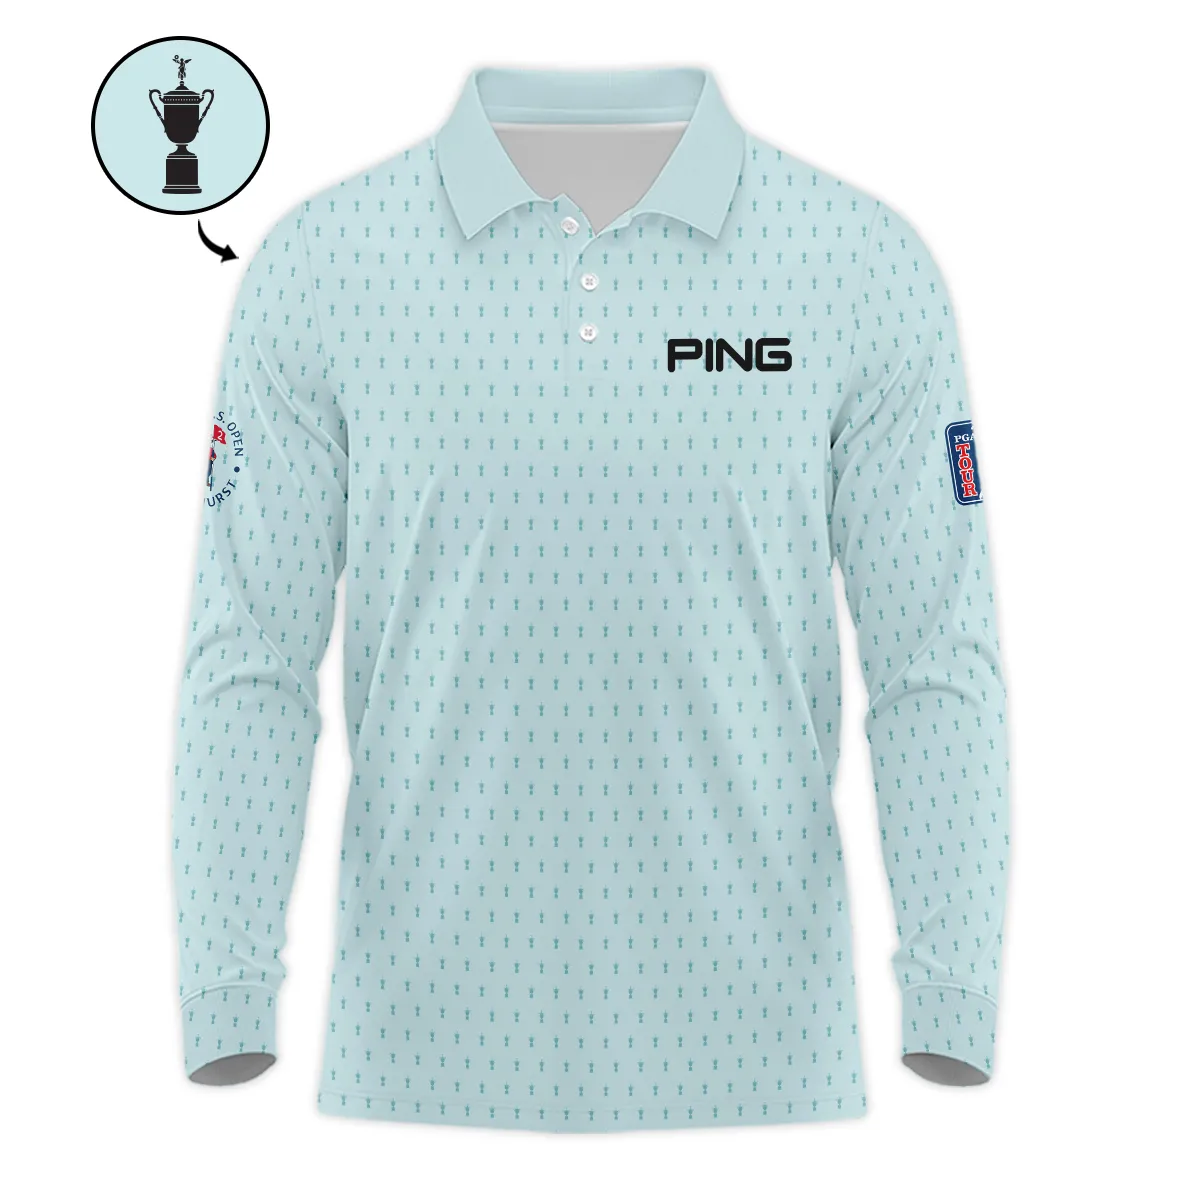 Sports 124th U.S. Open Ping Pinehurst Stand Colar Jacket Cup Pattern Pastel Green All Over Print Stand Colar Jacket